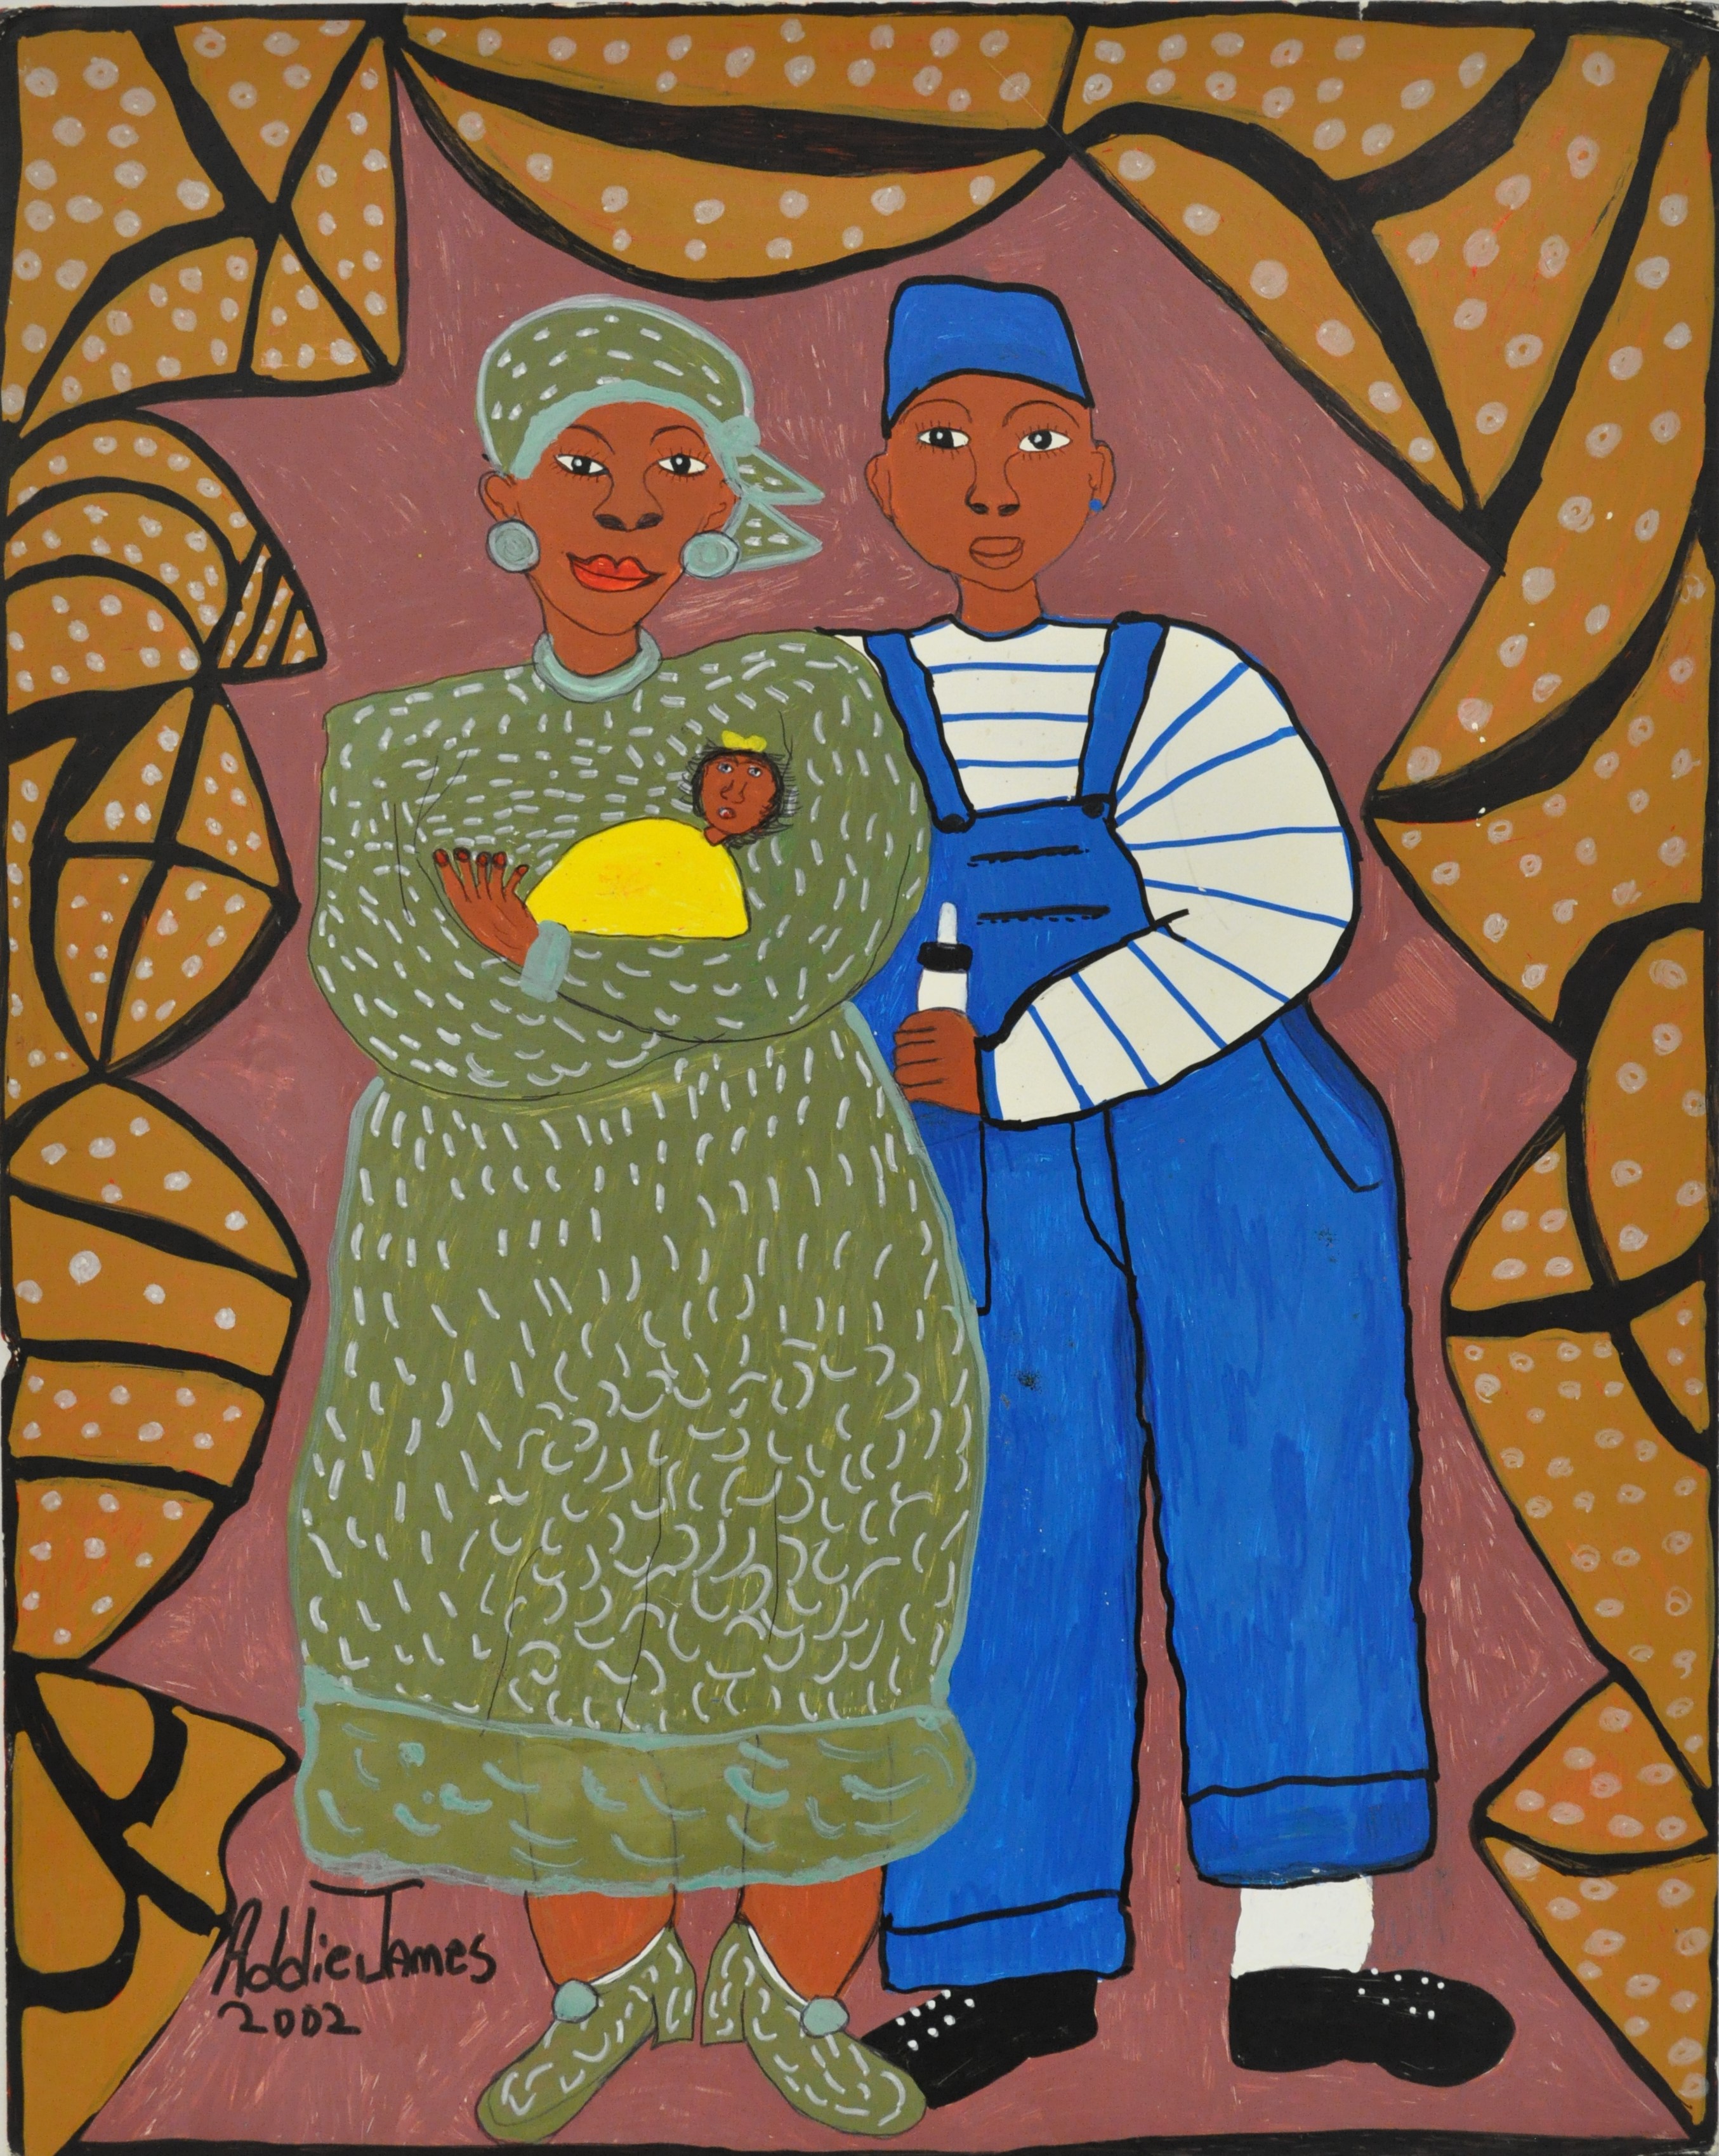 Addie James, Big Mama Demp, 2002, acrylic and pen on foamcore, 20 × 16 inches. Asheville Art Museum. © Estate of Addie James.